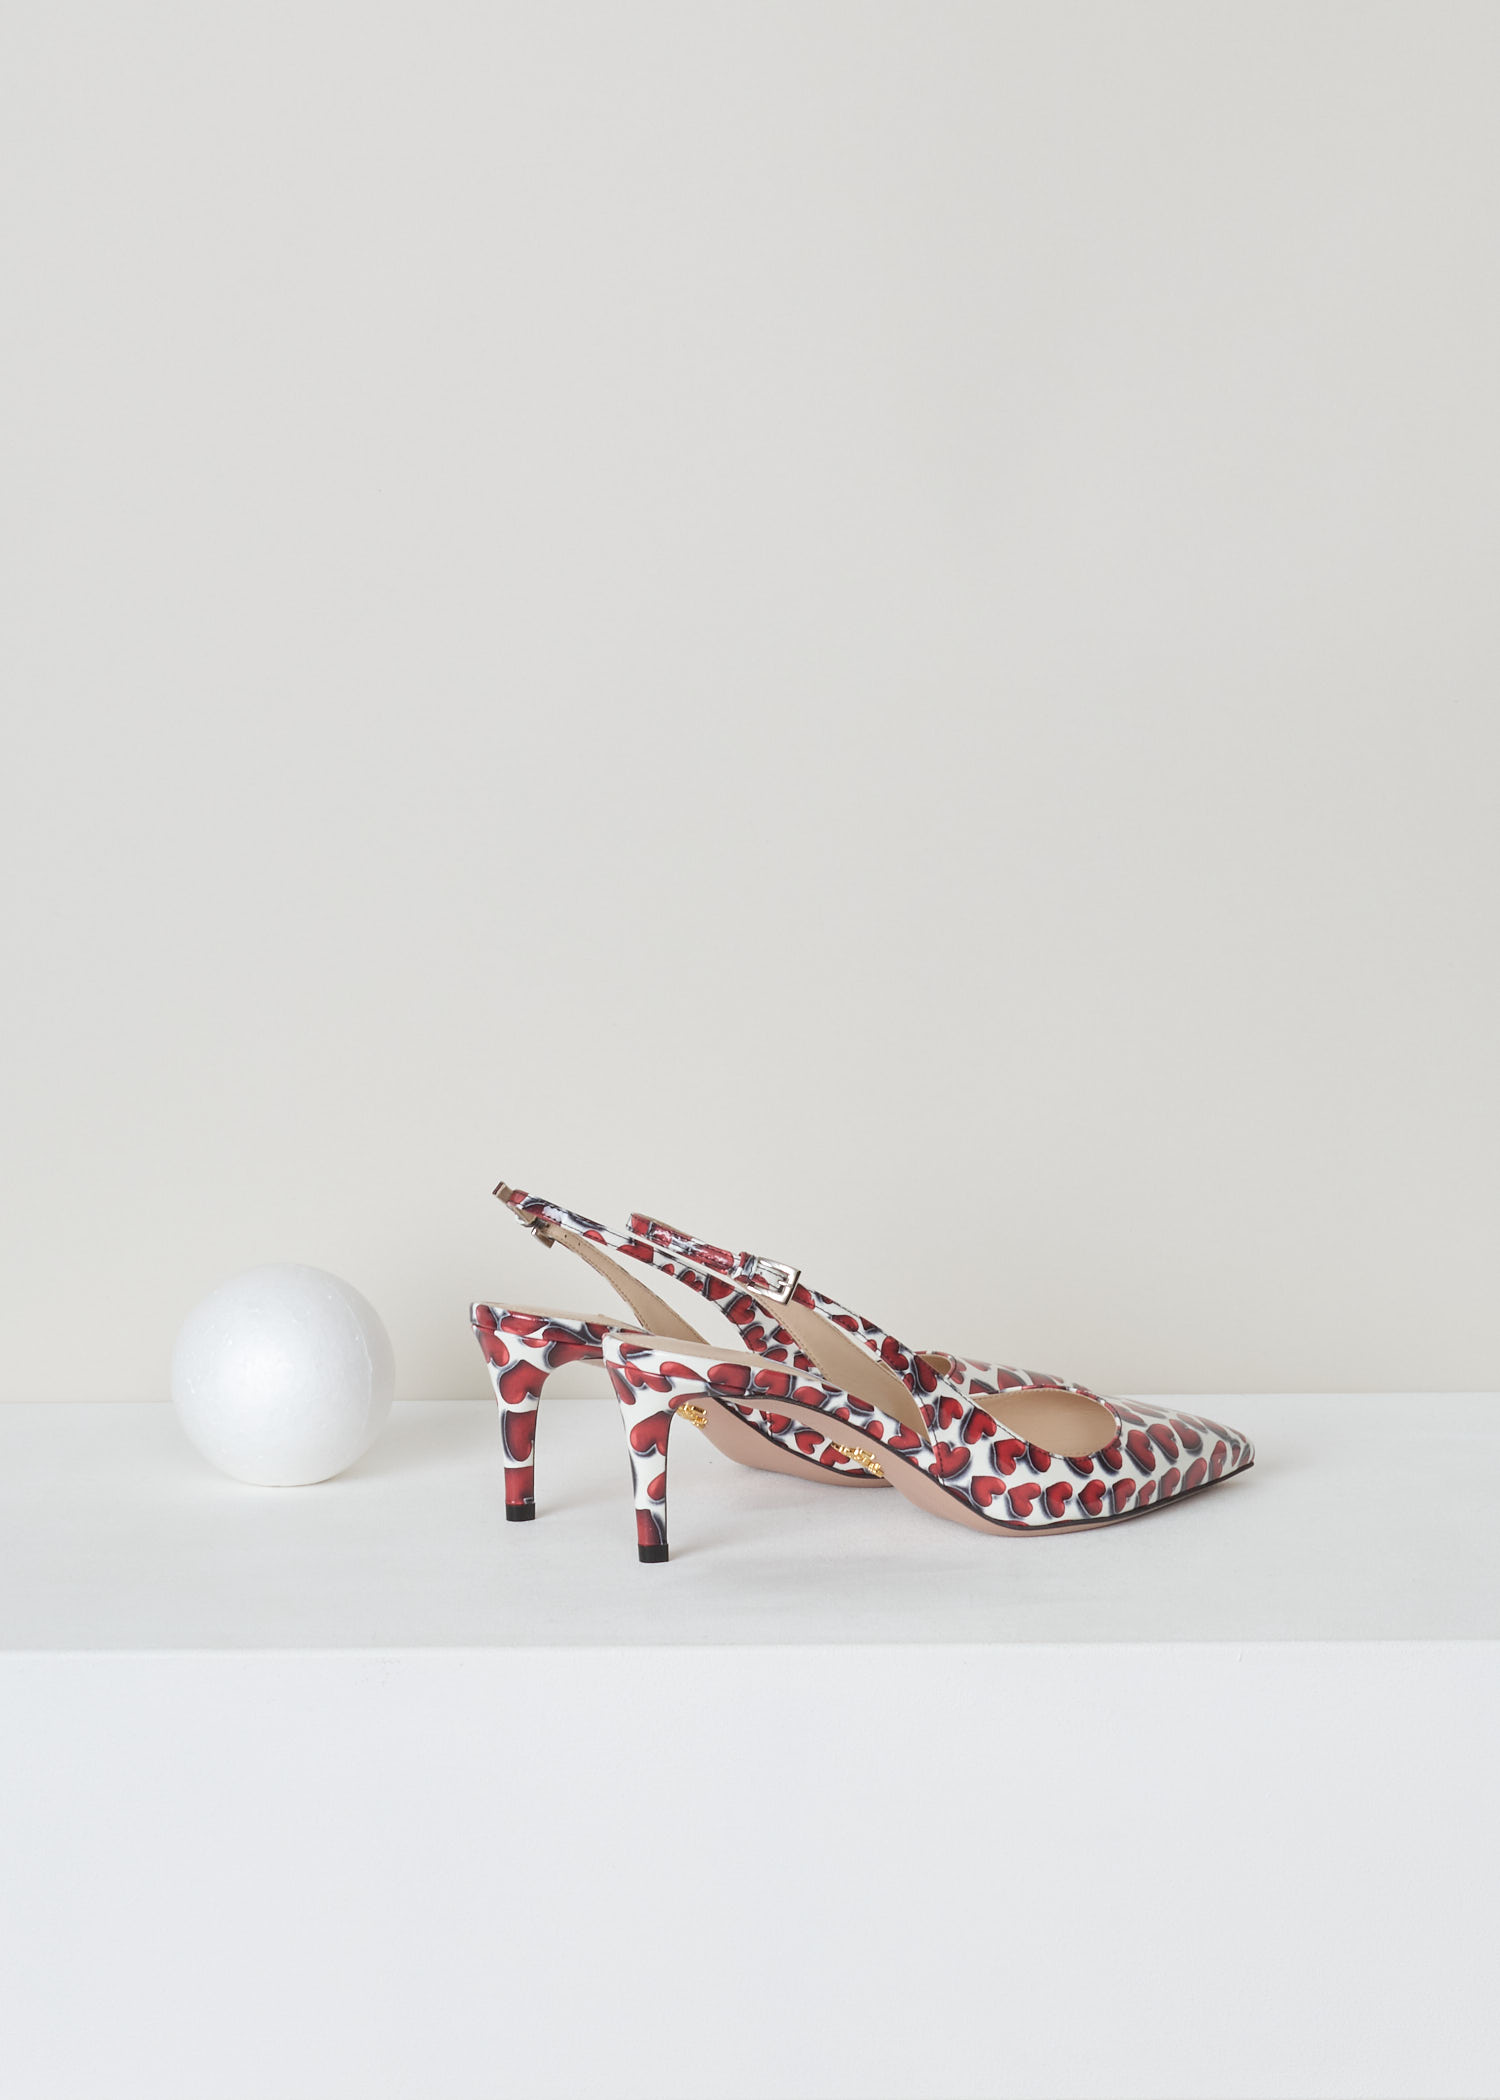 Prada, Red and white patent leather heart print, vernice_cuori_1I833I_F0D56_scarlatto, red white, back, Red and white heart printed slingback. Pointed toe and mid high stiletto heel. With a gold-tone logo plaque on the sole.